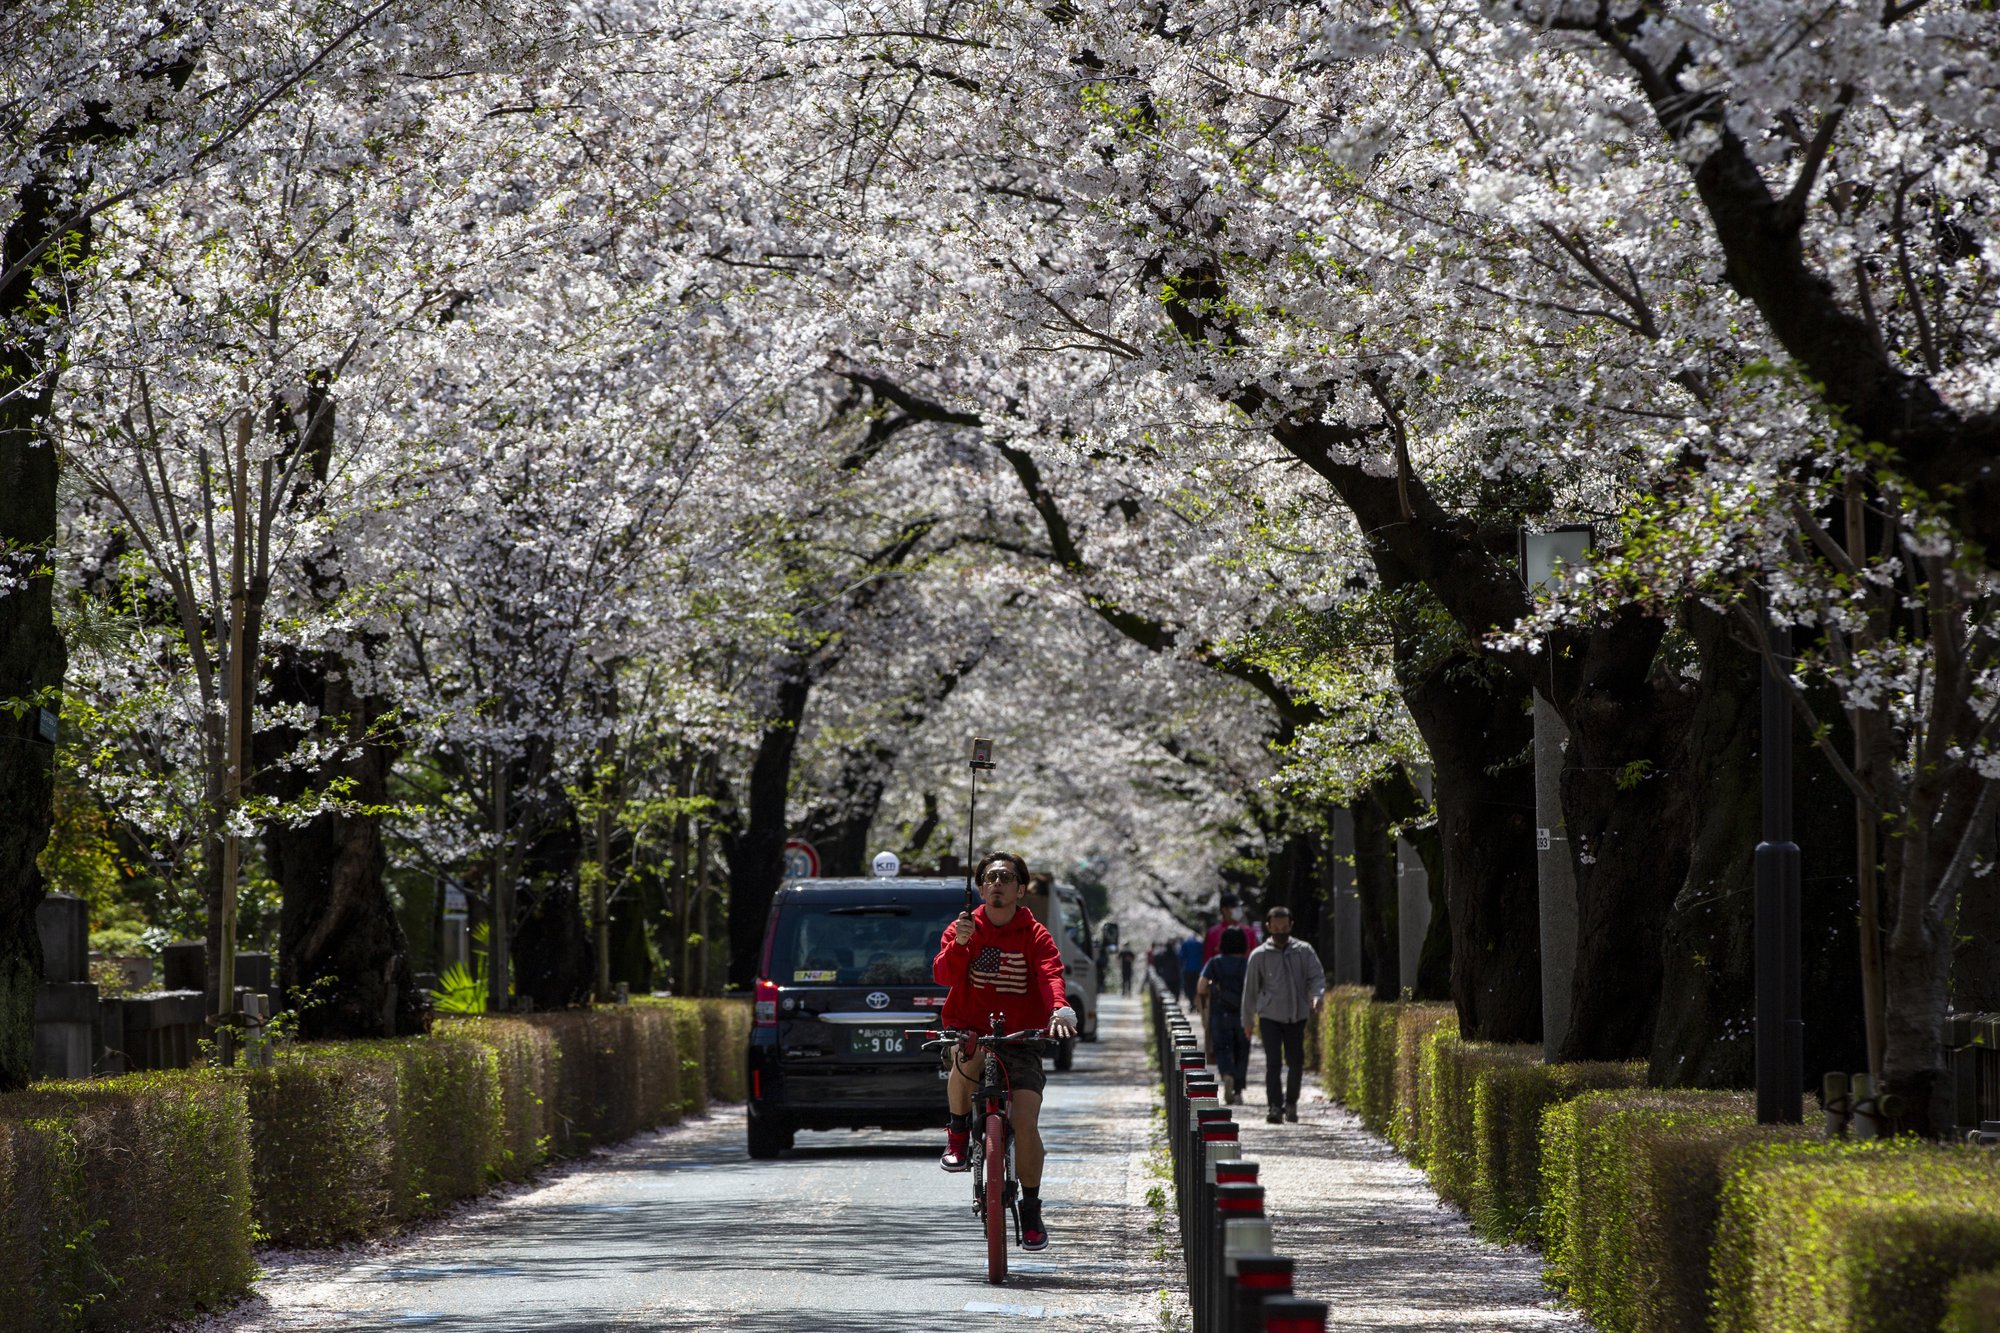 A person films a video with his phone on a selfie stick while riding a bicycle under a canopy of cherry blossoms Monday, March 29, 2021, in Tokyo